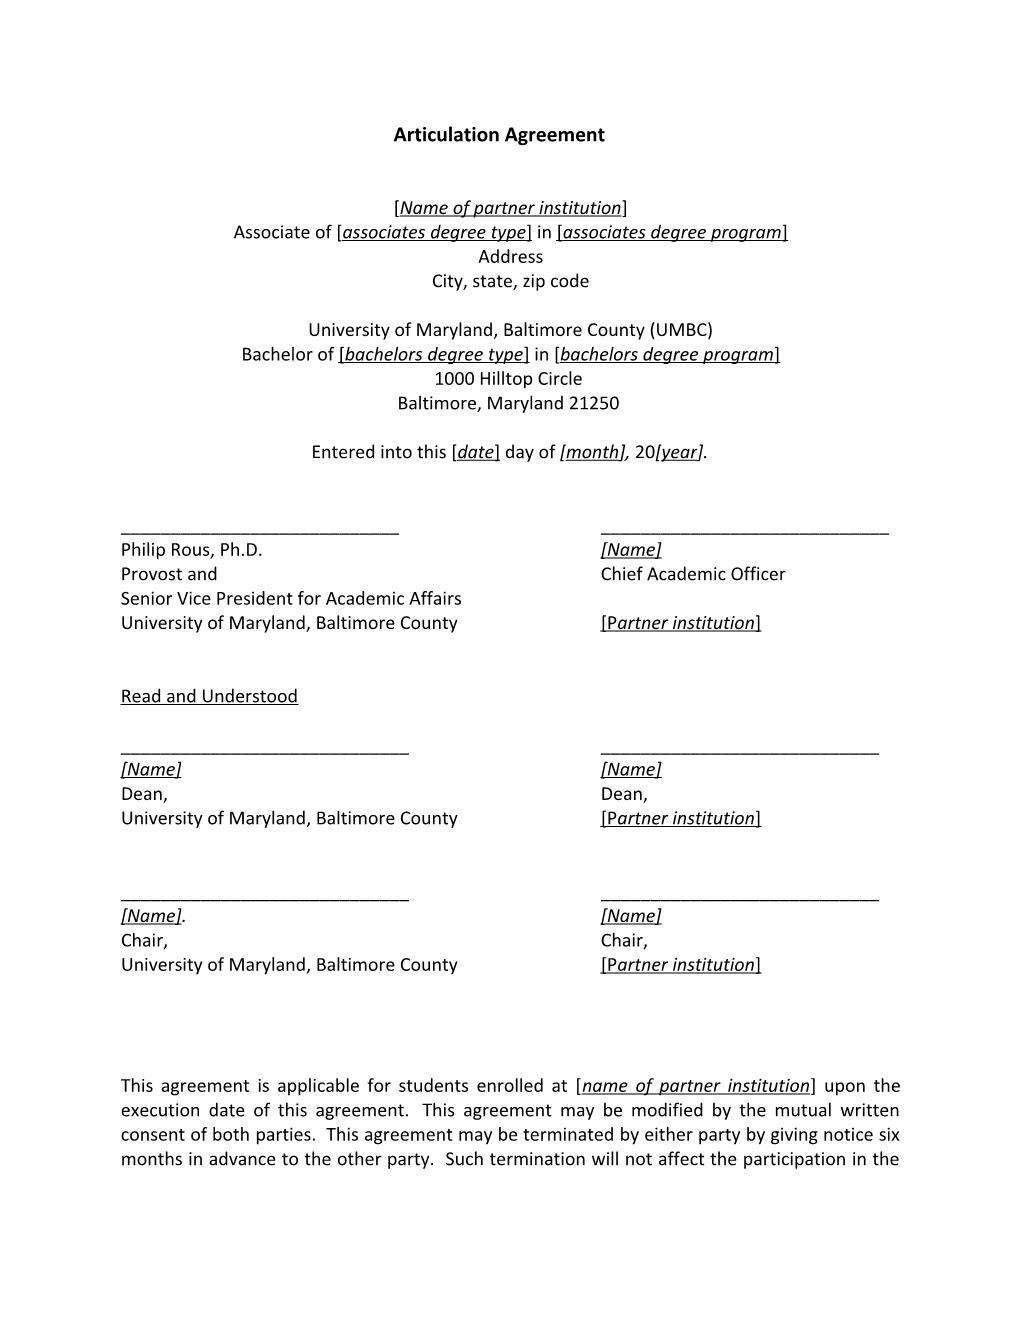 Articulation Agreement Template Revised 2011